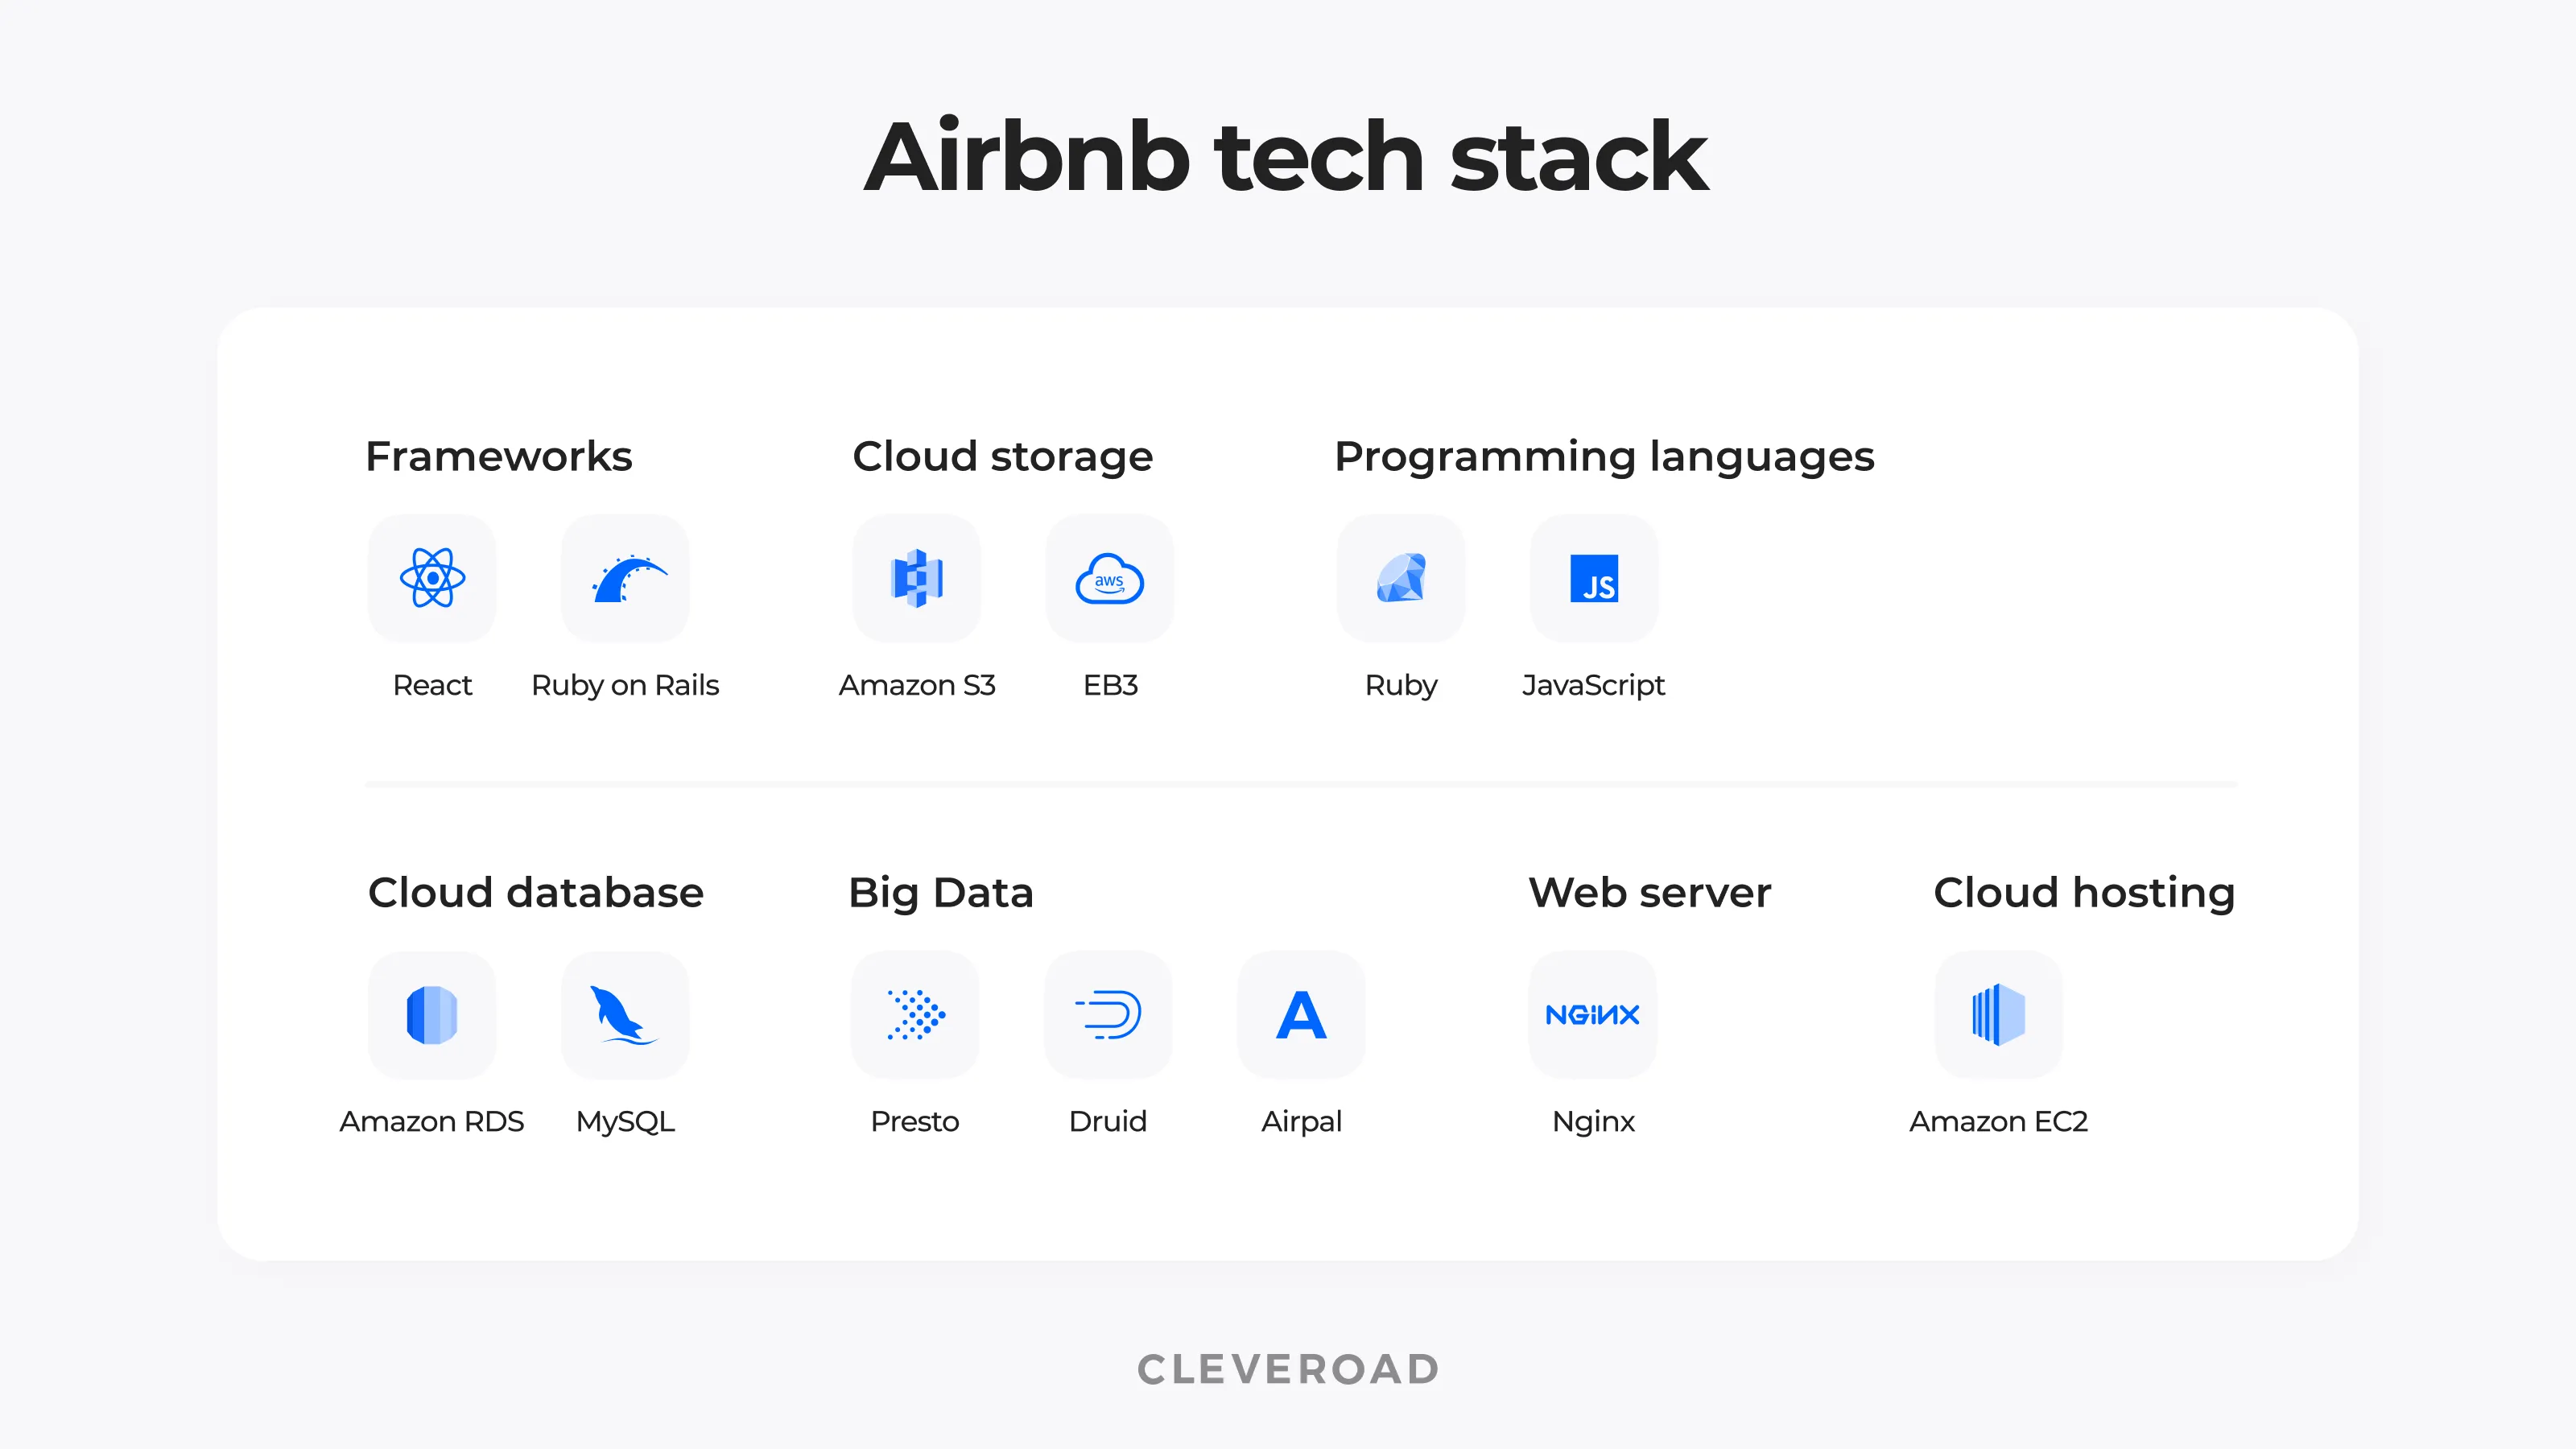 Technologies required to make an app like Airbnb